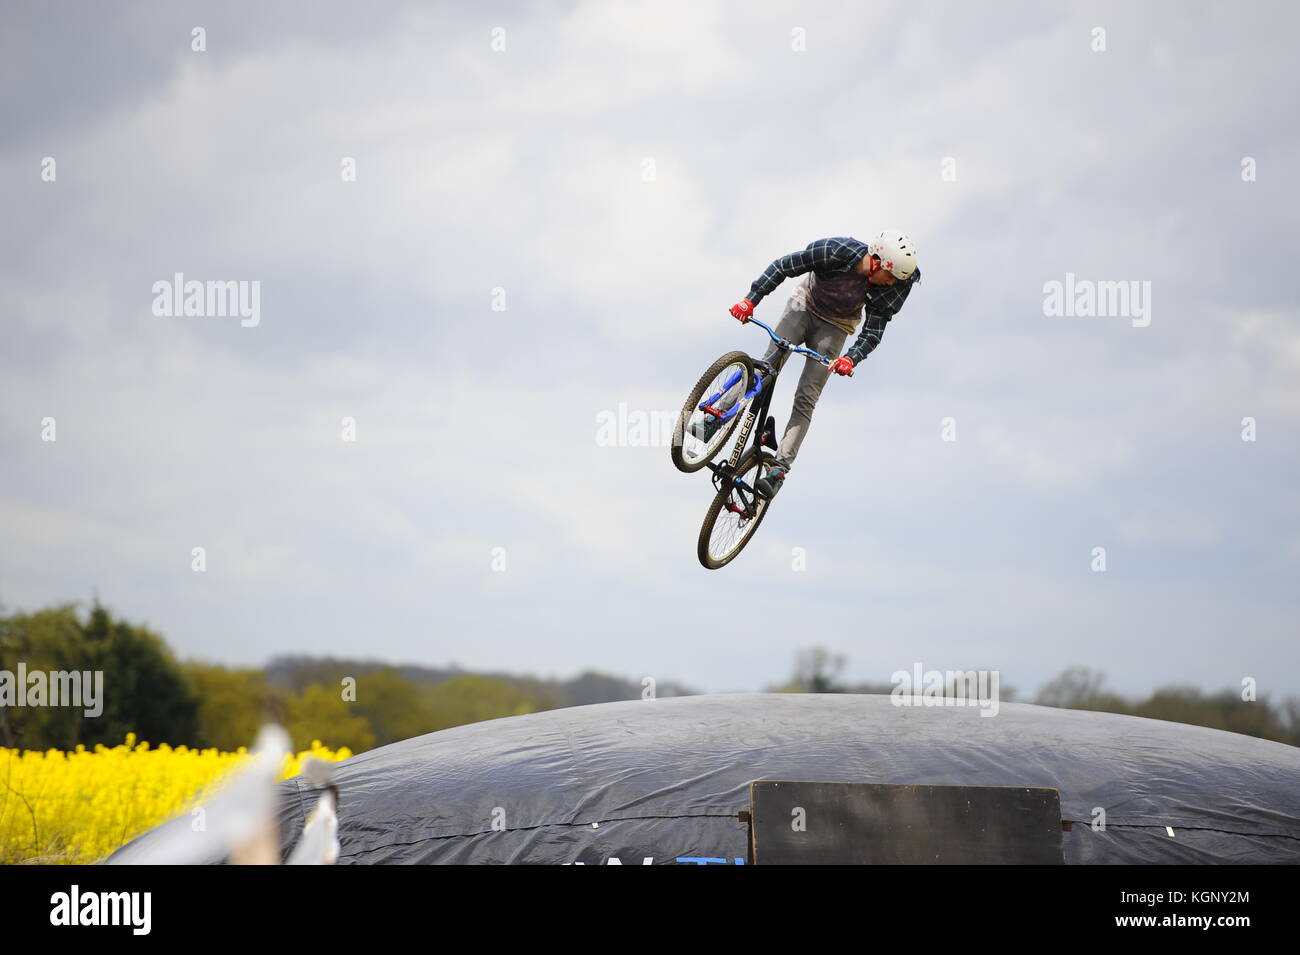 Mountain biking at Chicksands, Bedfordshire. Riders jumping off a large take off ramp onto a huge airbag. Trying & perfecting new tricks. Stock Photo